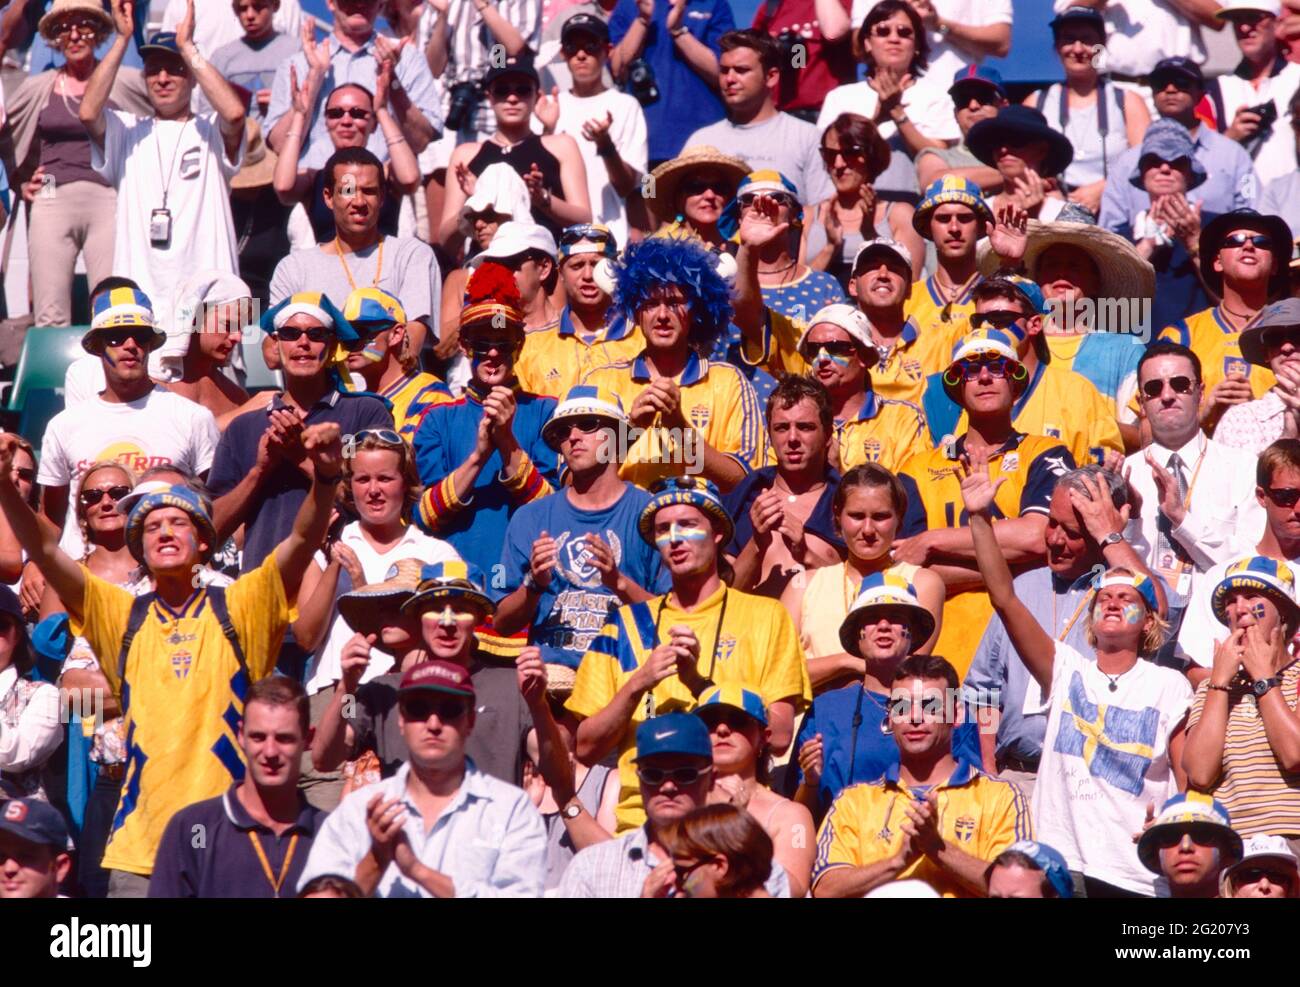 Supporters of the Swedish tennis team, 1990s Stock Photo